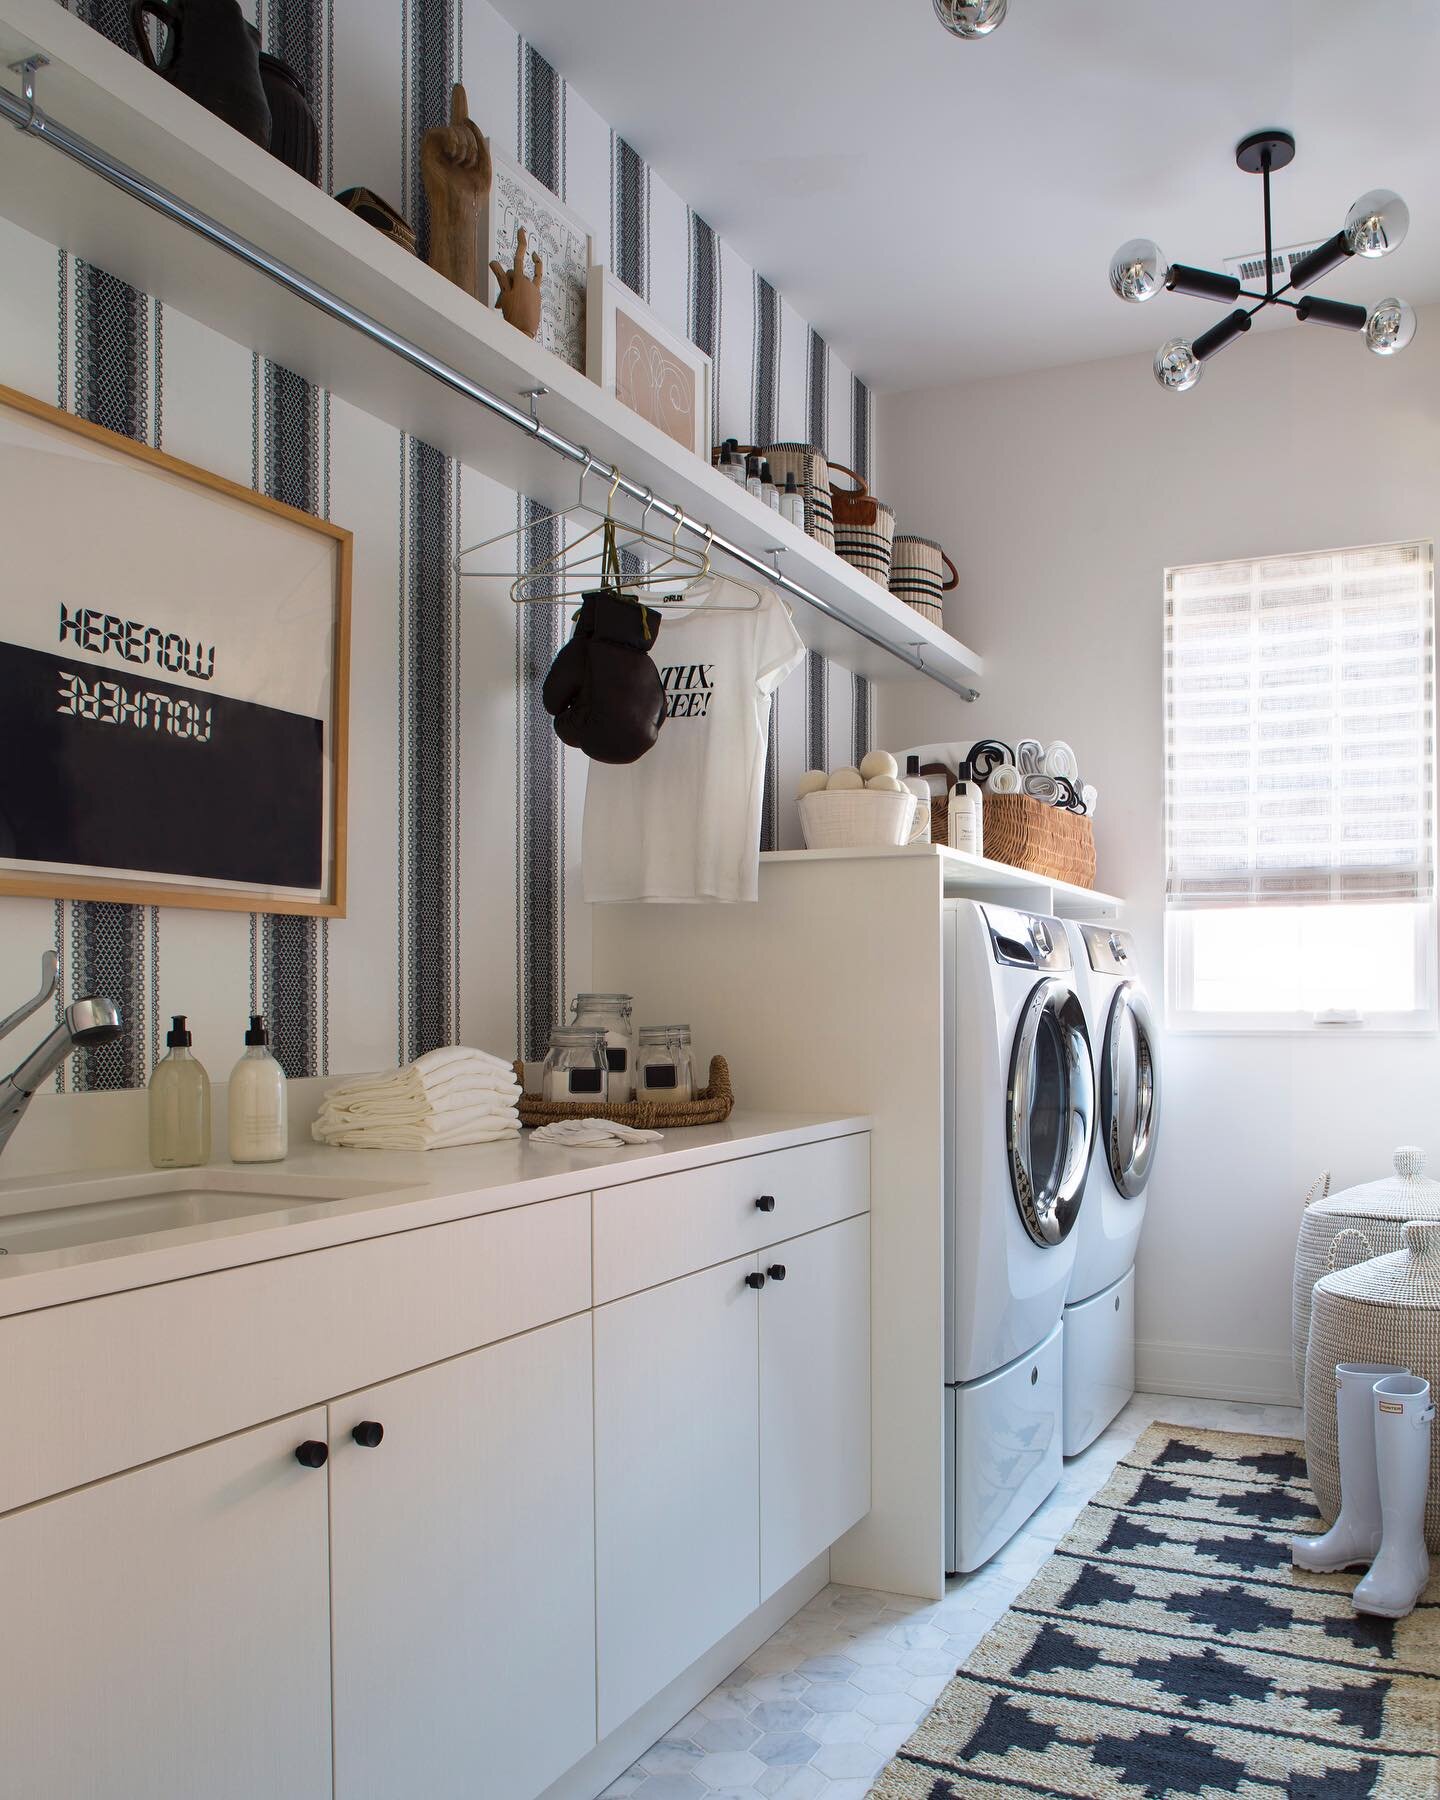 What laundry room dreams are made of!

For this showhouse, we were tasked with creating a space that made this chore feel less draining. And with 

▫️ a combination of natural and overhead lighting 
▫️ plenty of cabinet space
▫️ baskets for organizin